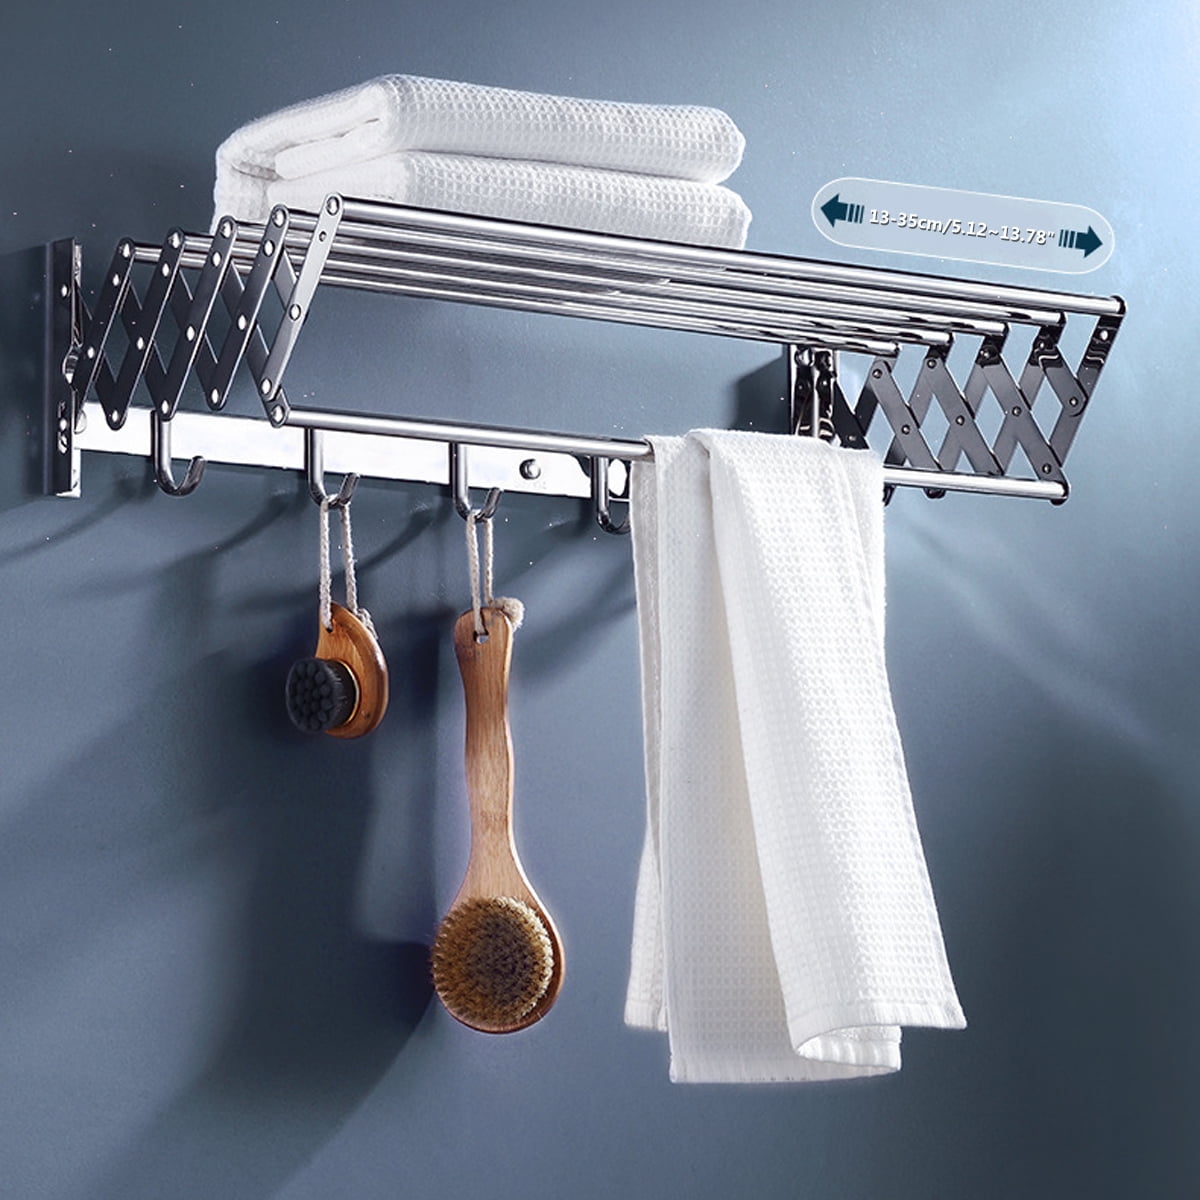 Stainless Steel Wall Mount Expandable Laundry Clothes Towel Drying Rack Hanger